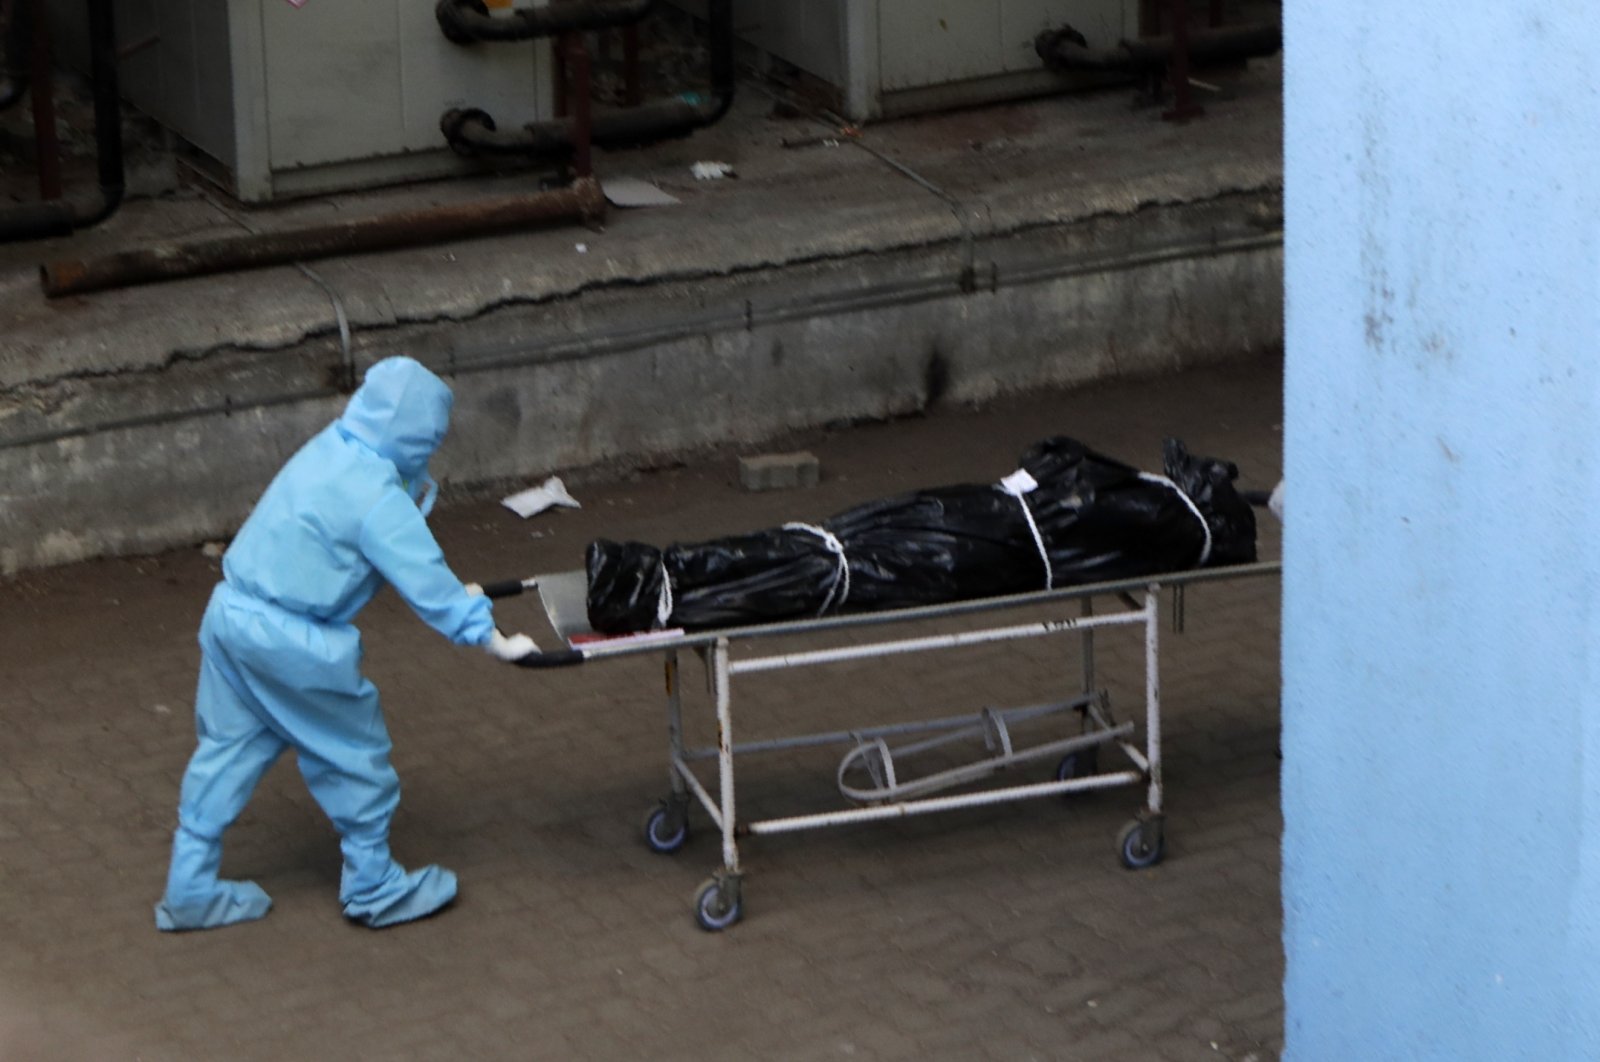 Hospital staff carries the body of a person who died of COVID-19 to a morgue in Mumbai, India, May 29, 2020. (AP Photo)